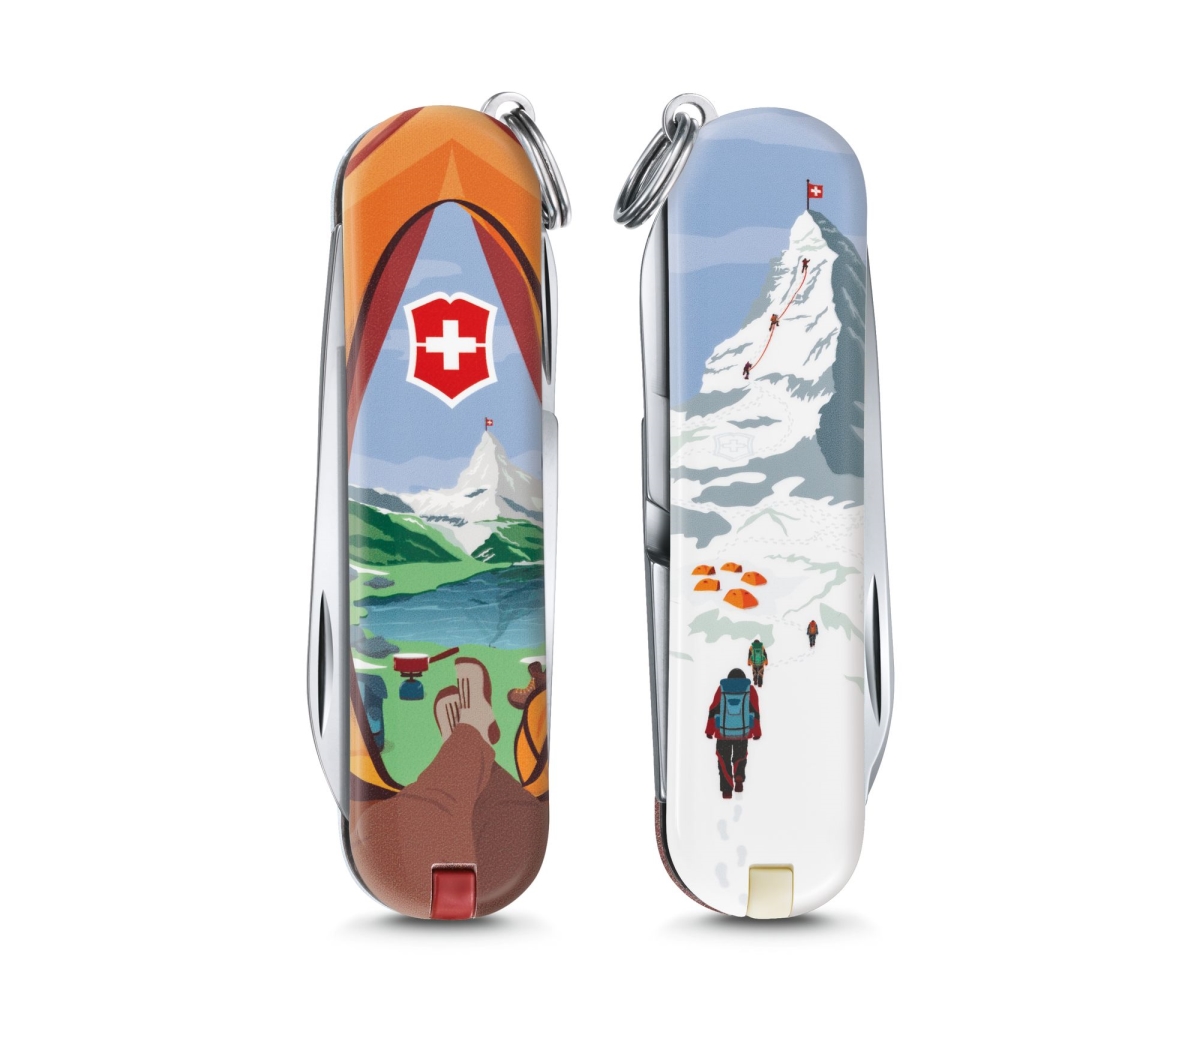 Swiss Army Brands VIC-0.6223.L1802 2019 Victorinox Call of Nature Classic Limited Edition Pocket Knife